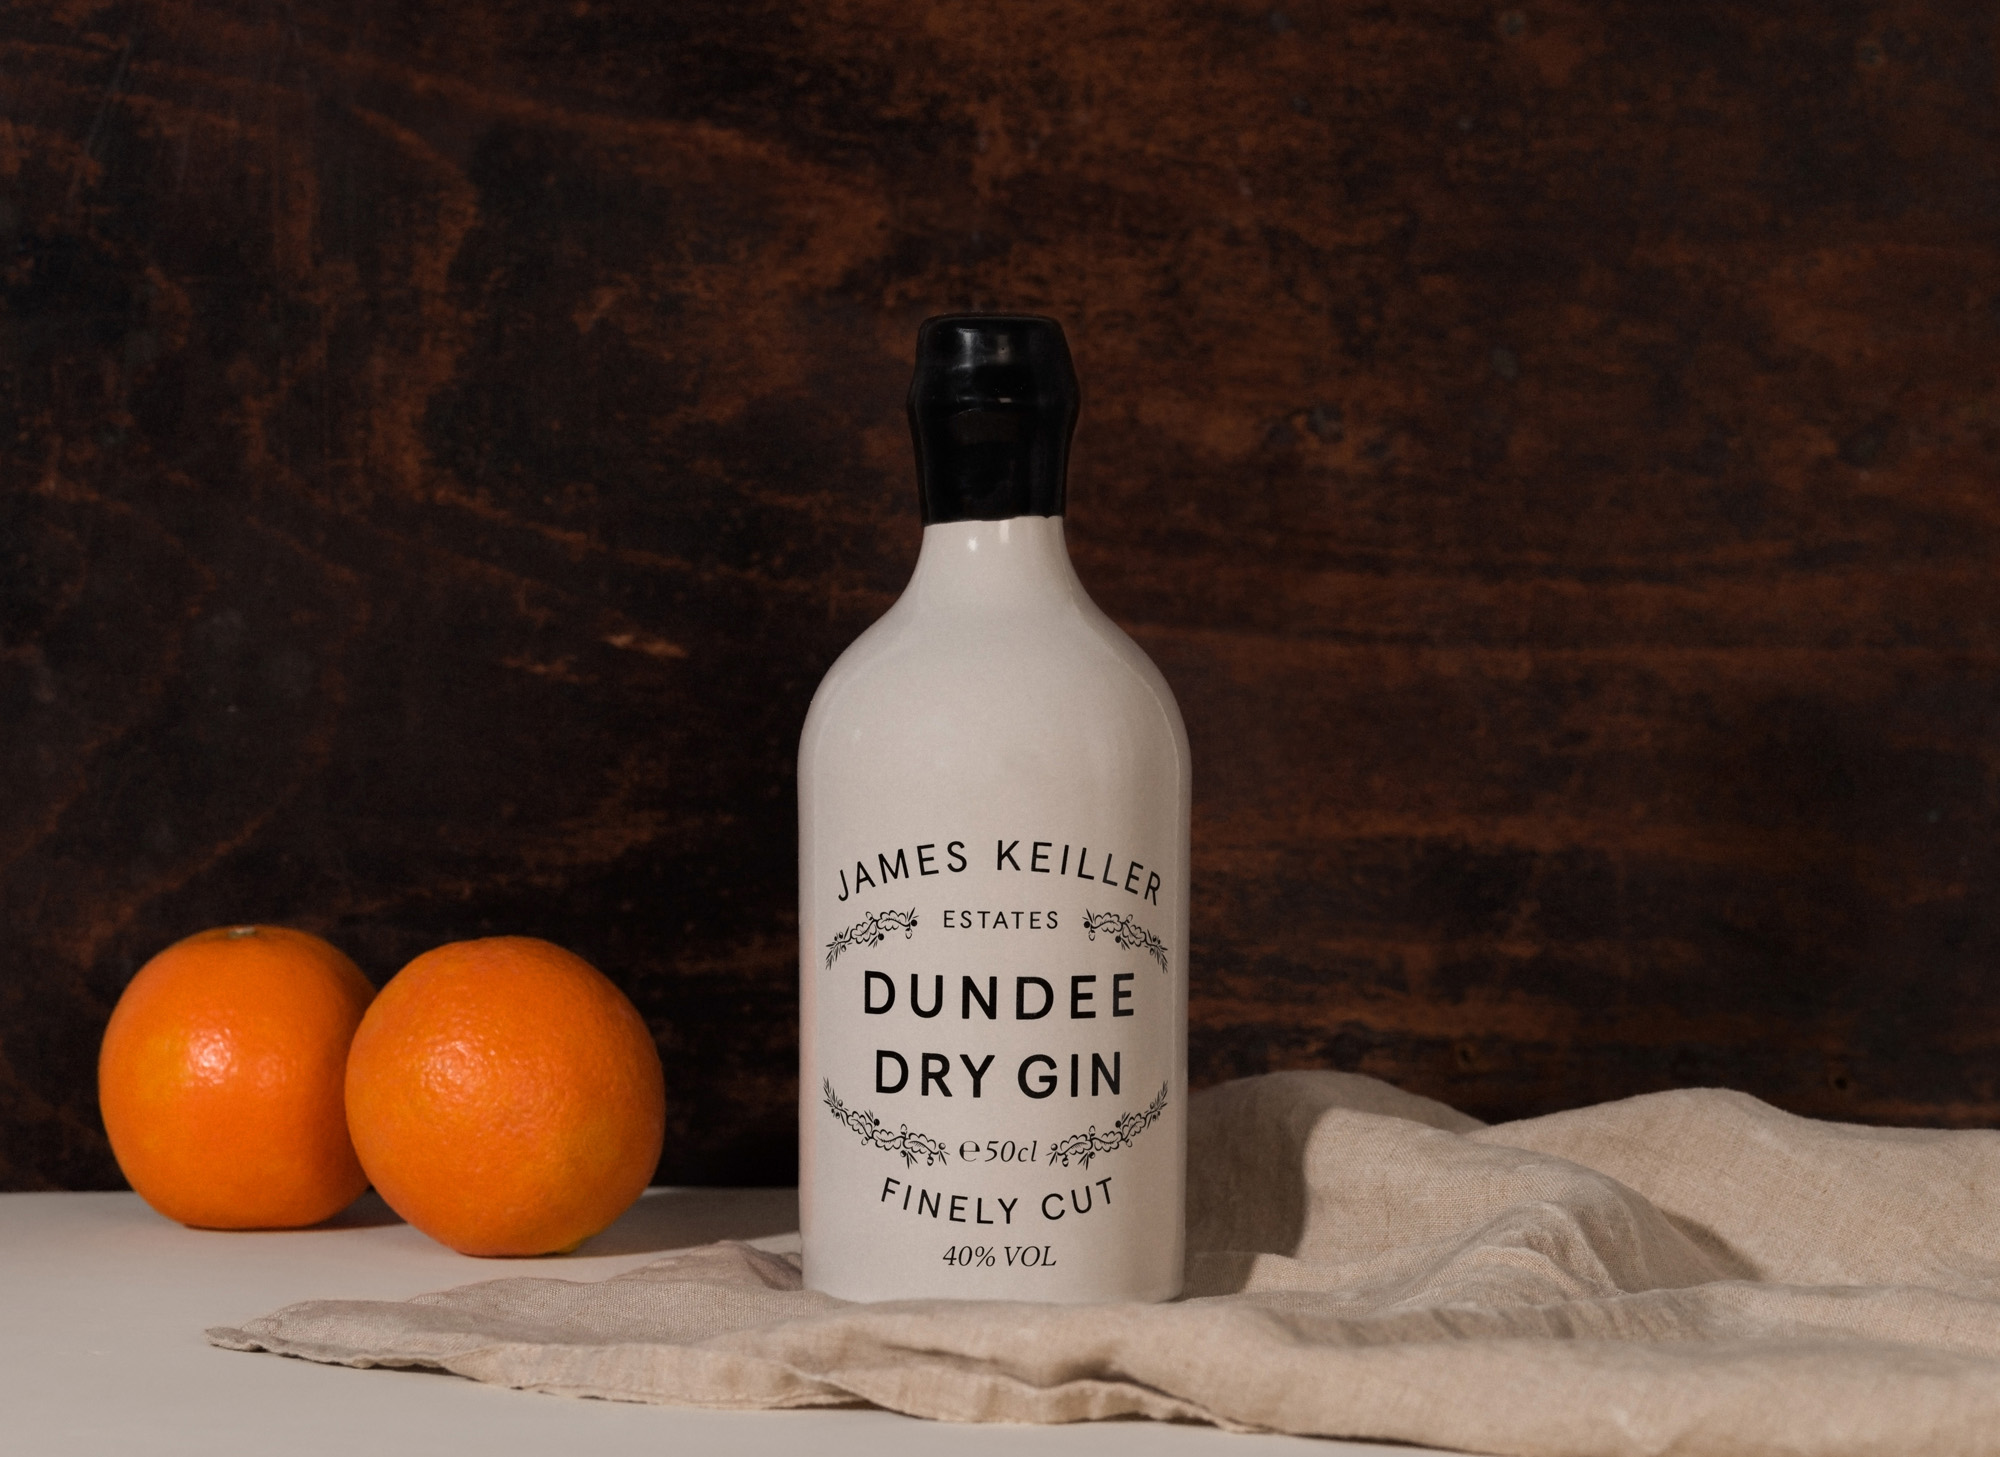 Keillers Dundee Dry Gin bottom with oranges